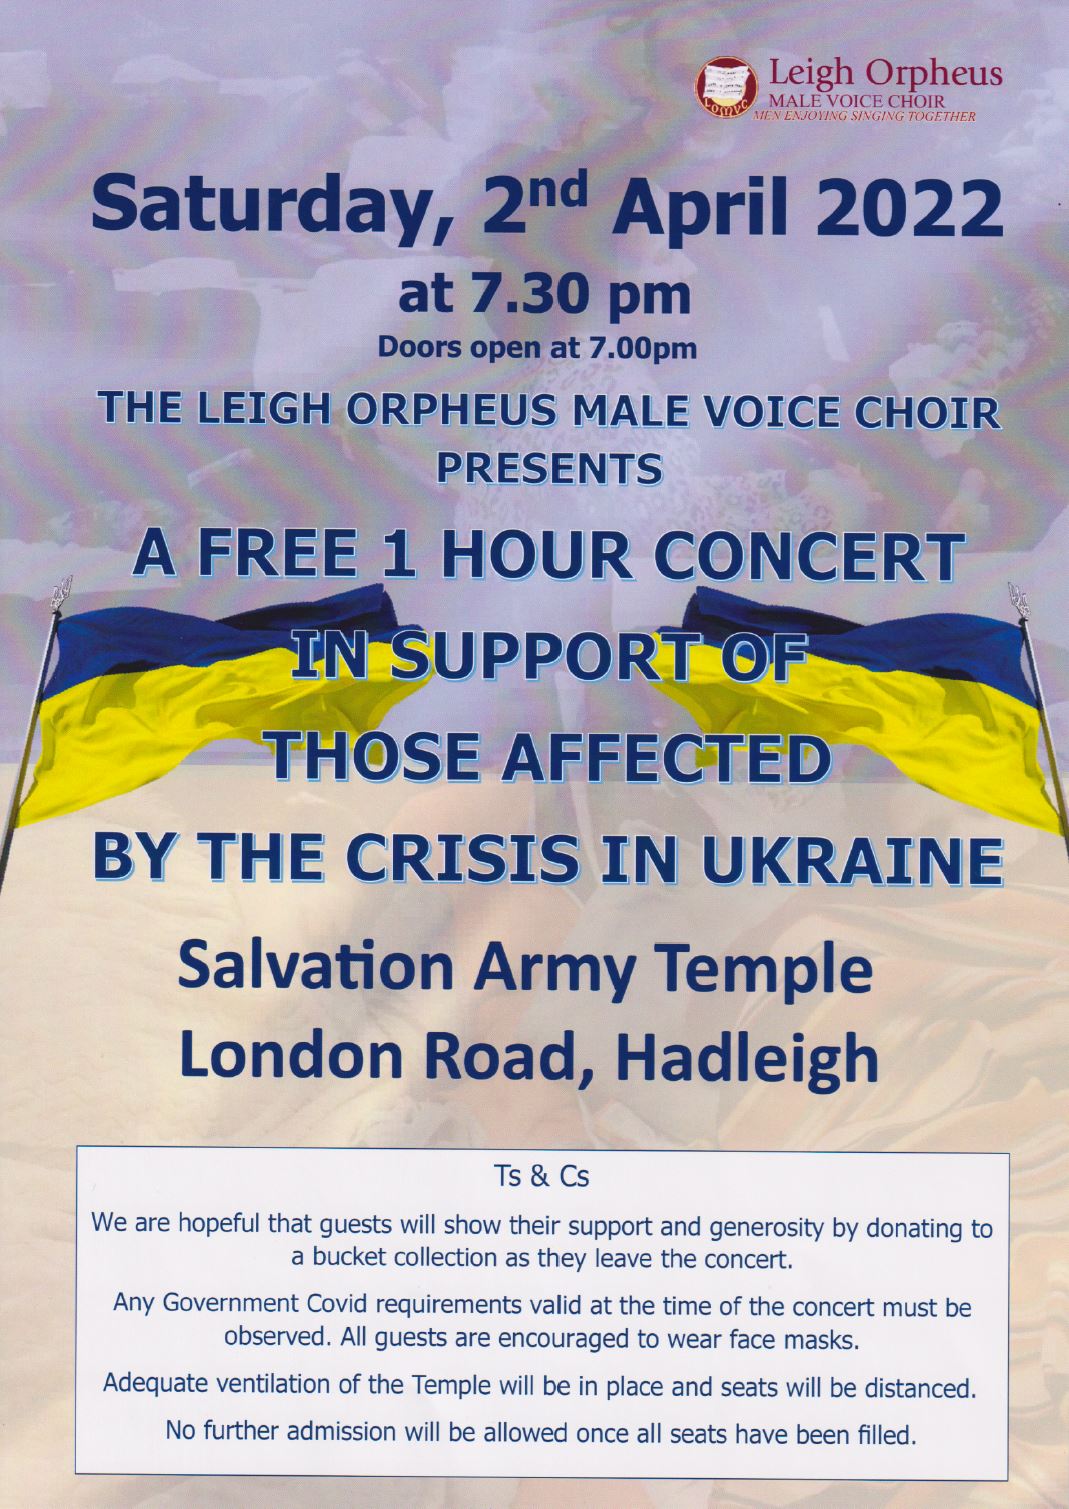 Leigh Orpheus Male Voice Choir Free 1 Hour Charity Concert for Those Affected by the Crisis in Ukraine